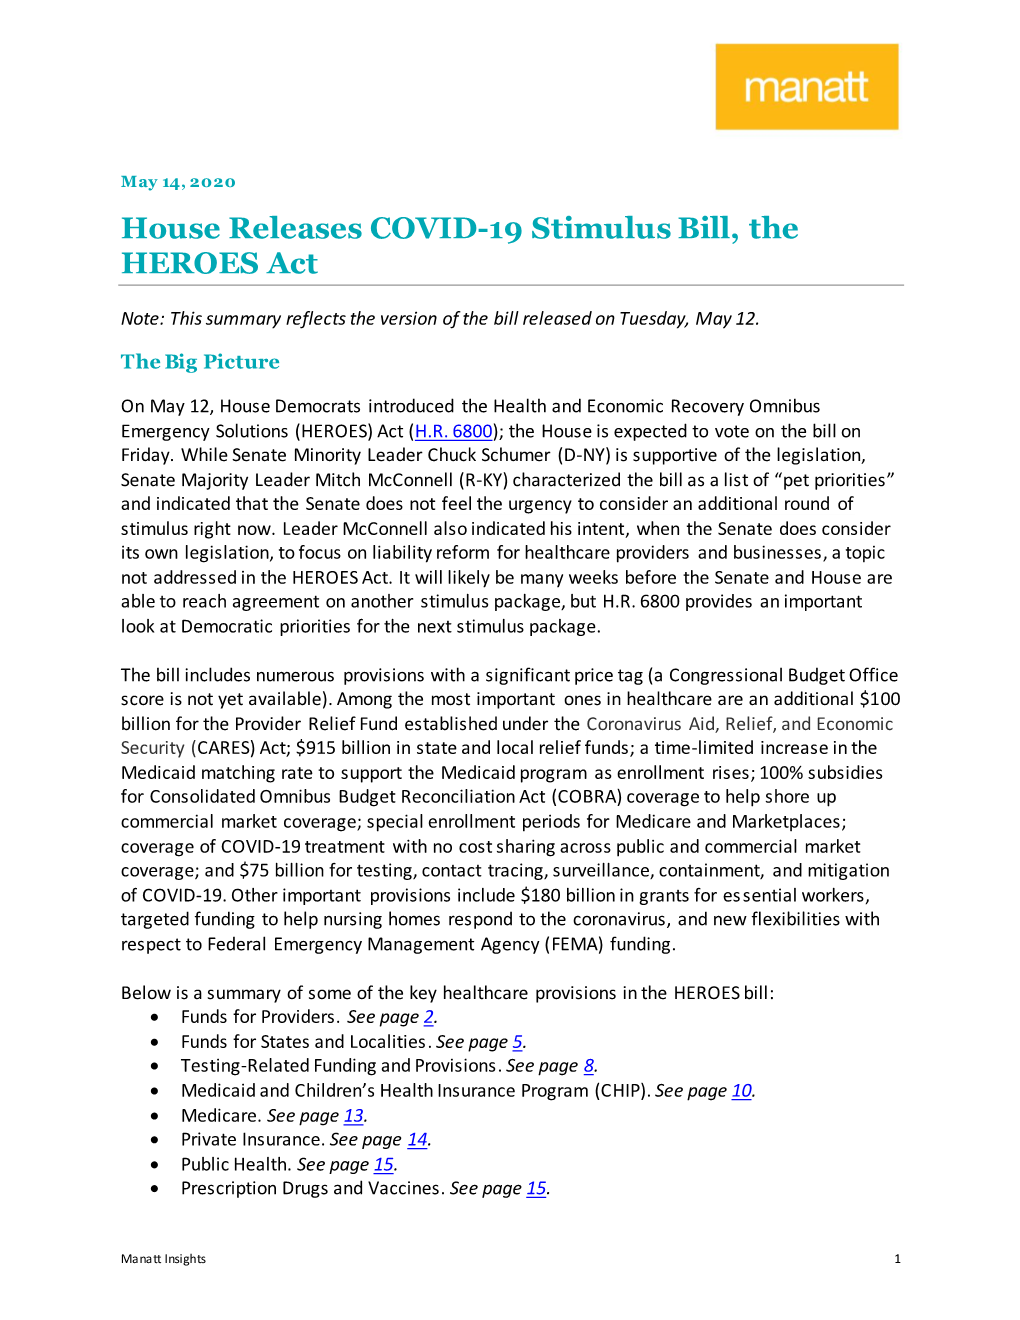 House Releases COVID-19 Stimulus Bill, the HEROES Act